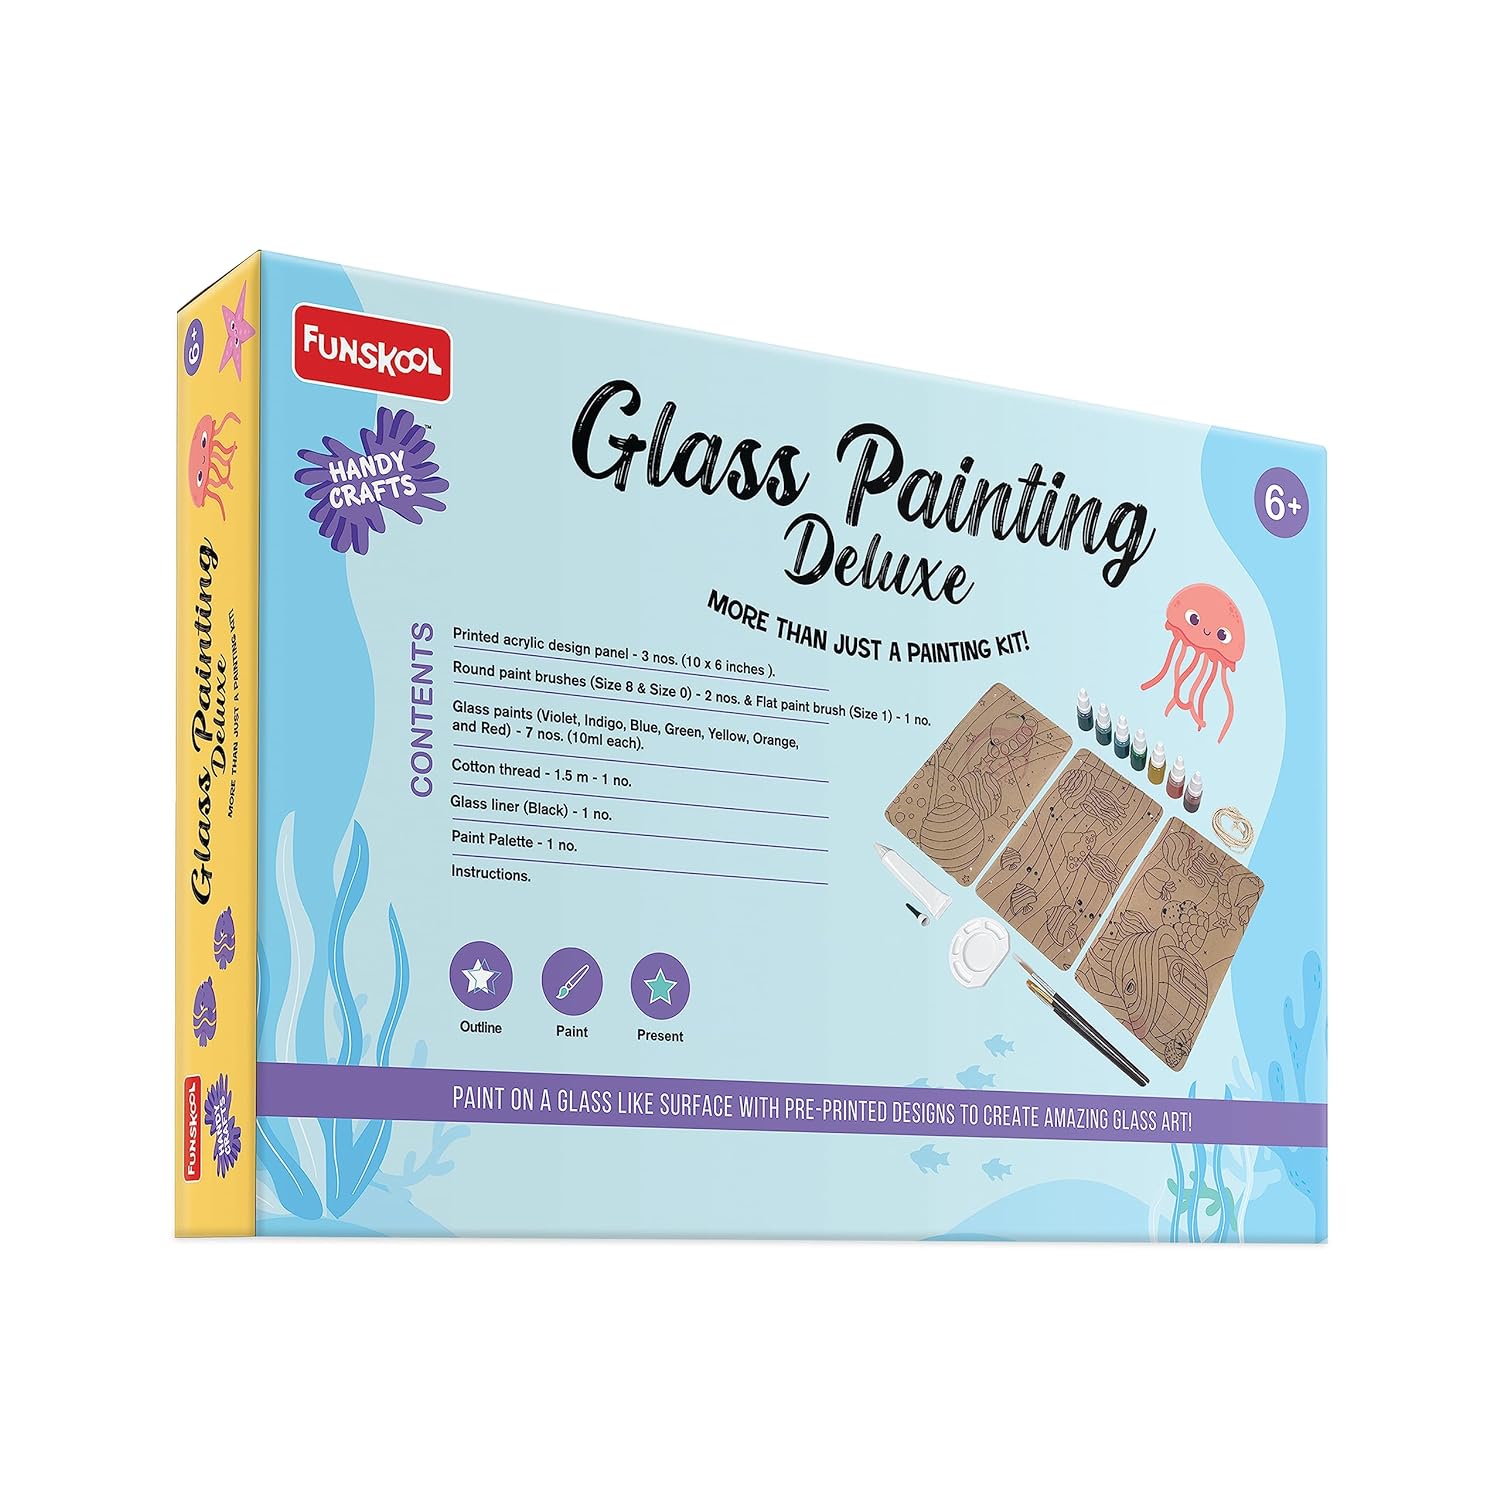 Funskool Handycrafts Glass Painting Deluxe Arts and Crafts Kit for kIds Ages 6 Years and Above